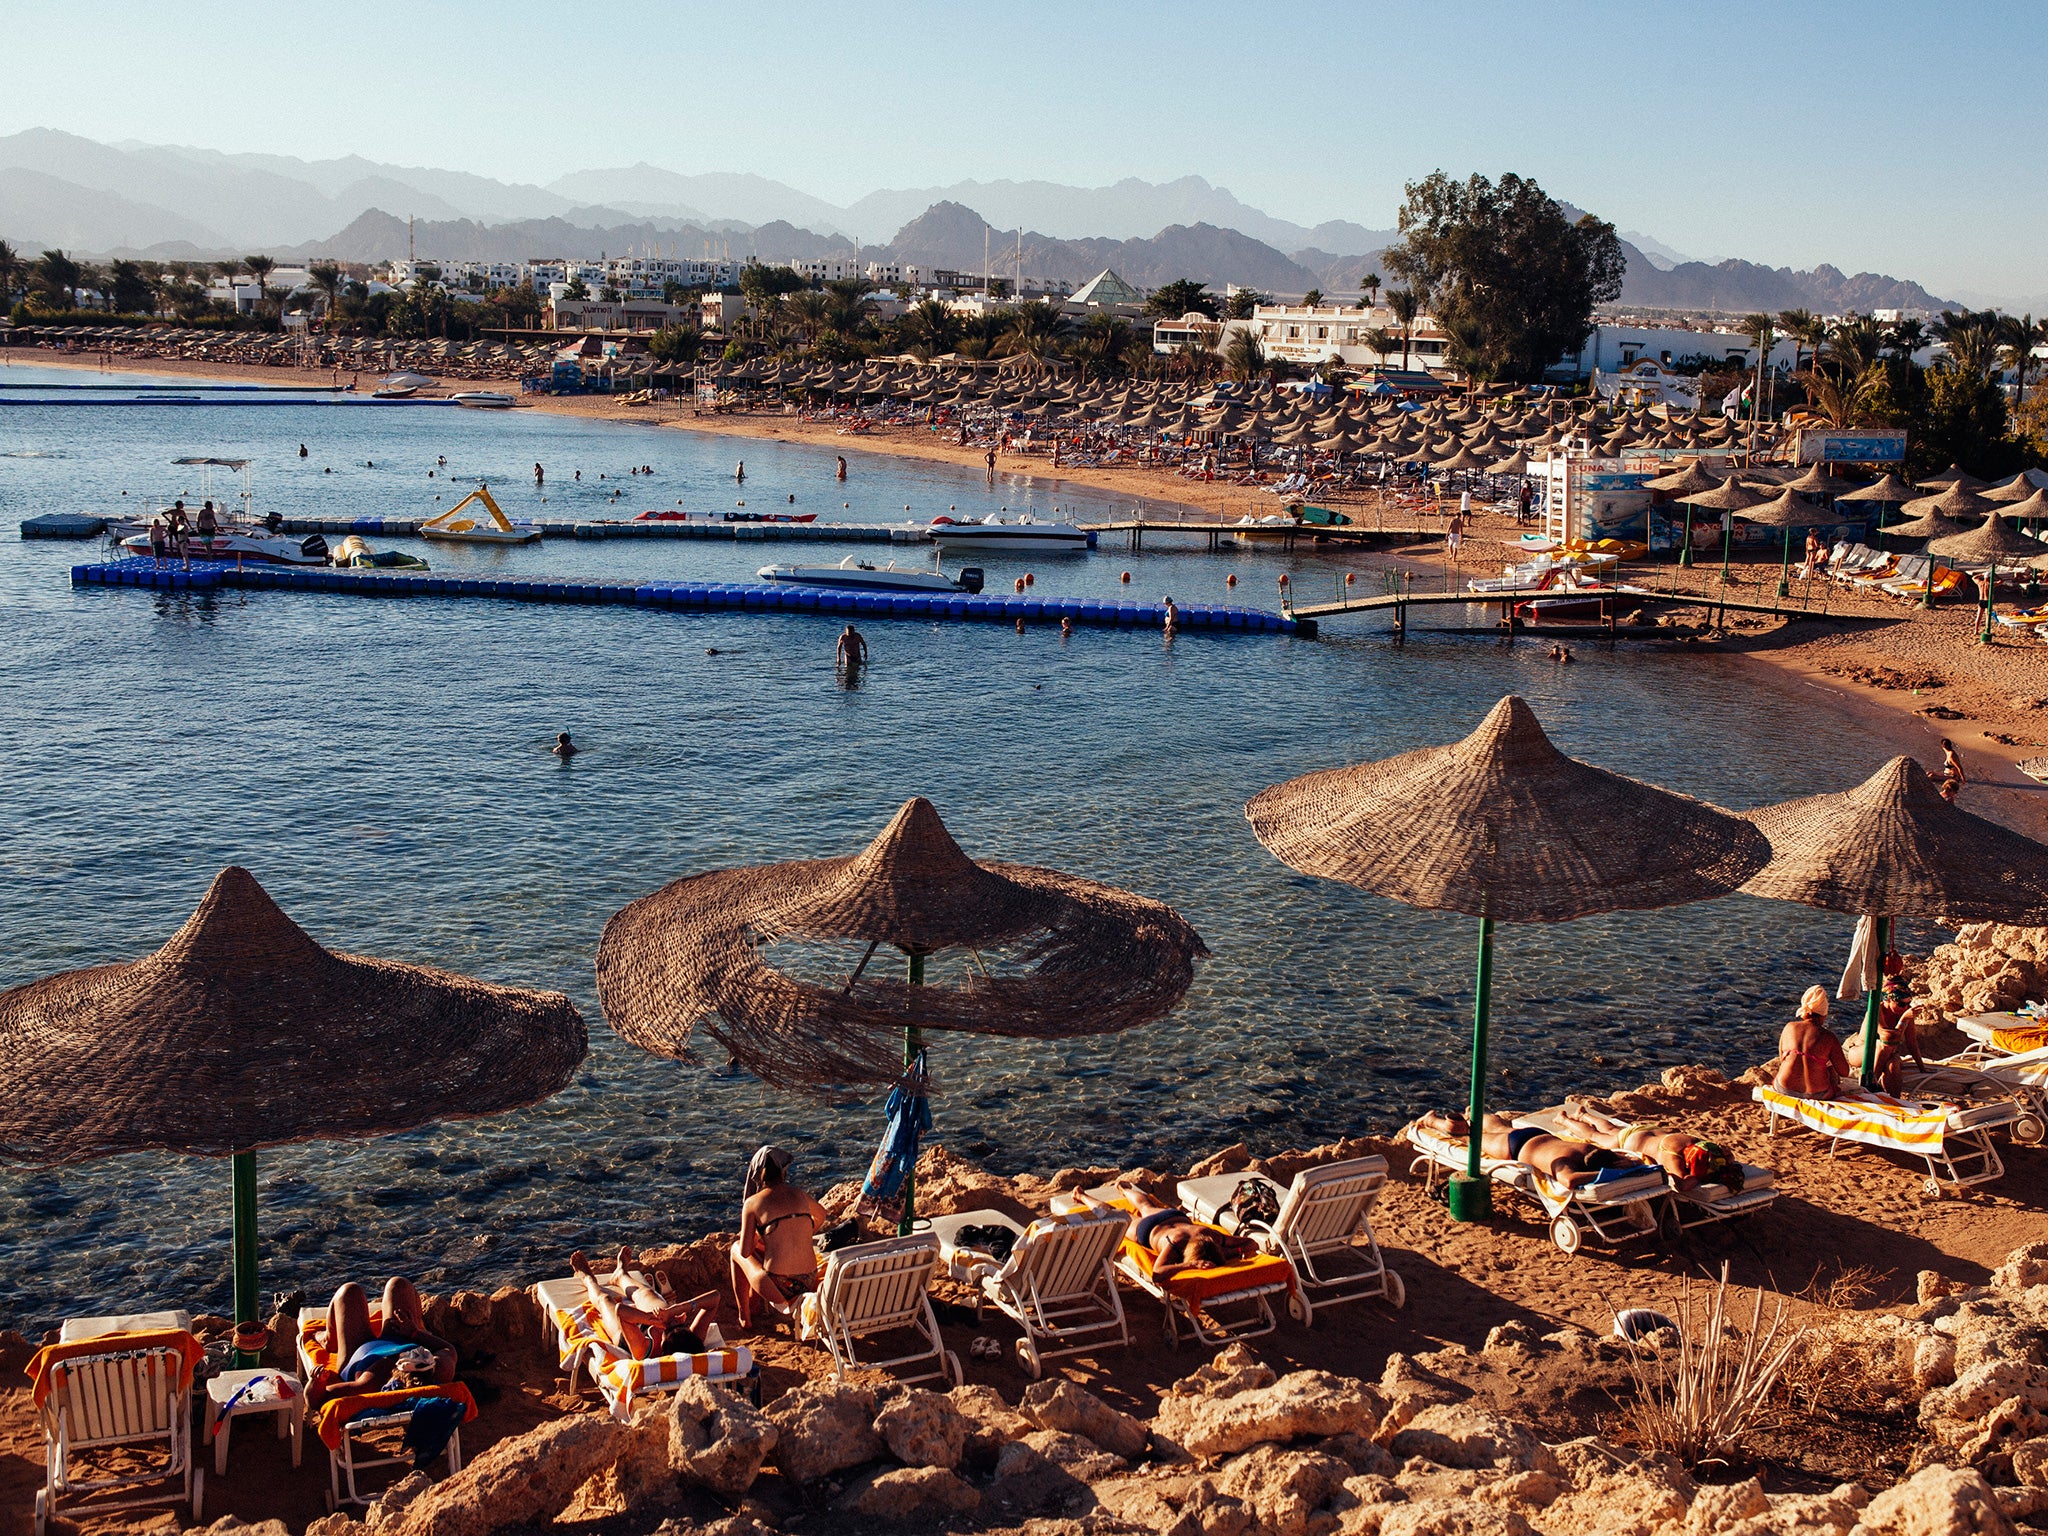 The winter season for British tourists to Sinai resorts was effectively wiped out